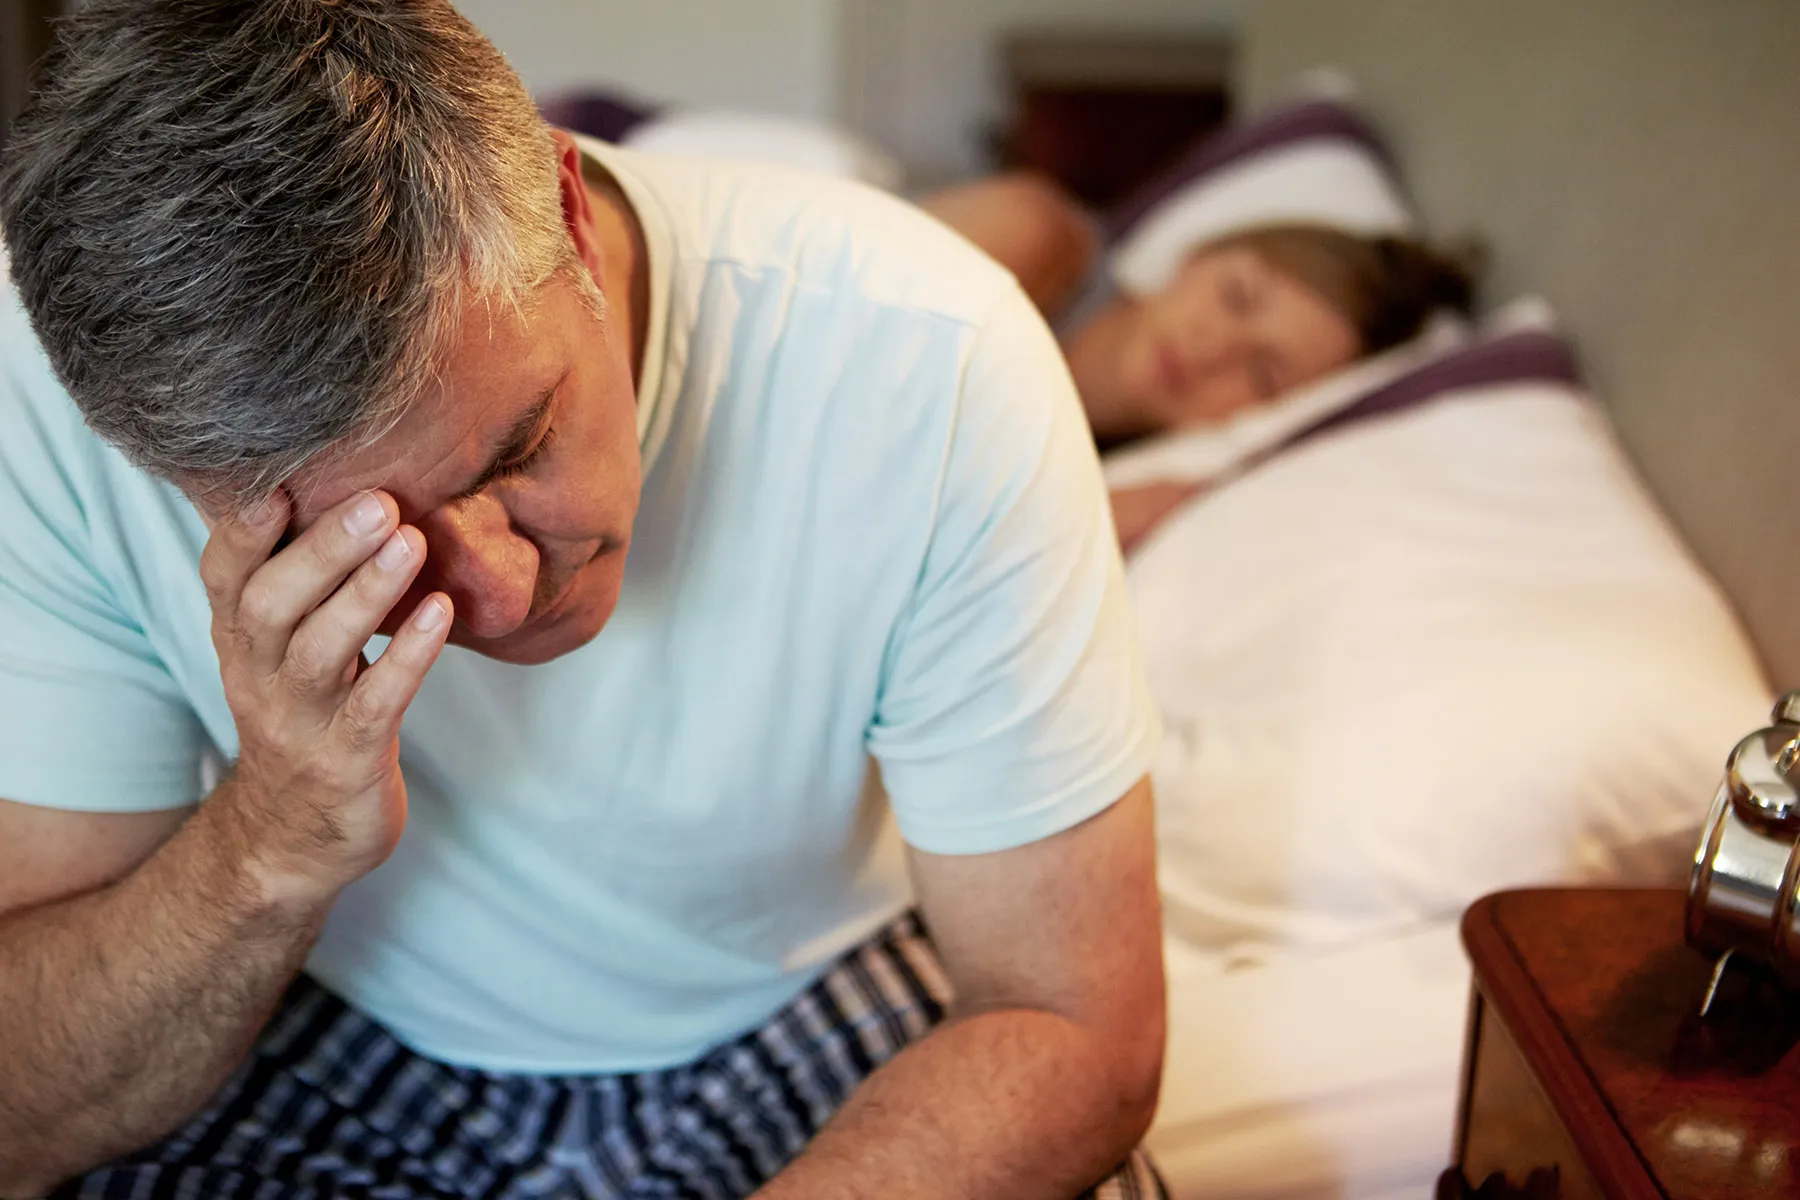 When you have psoriatic arthritis, poor sleep can be an issue – and cause a flare. Break the cycle with these tips for getting the rest you need.